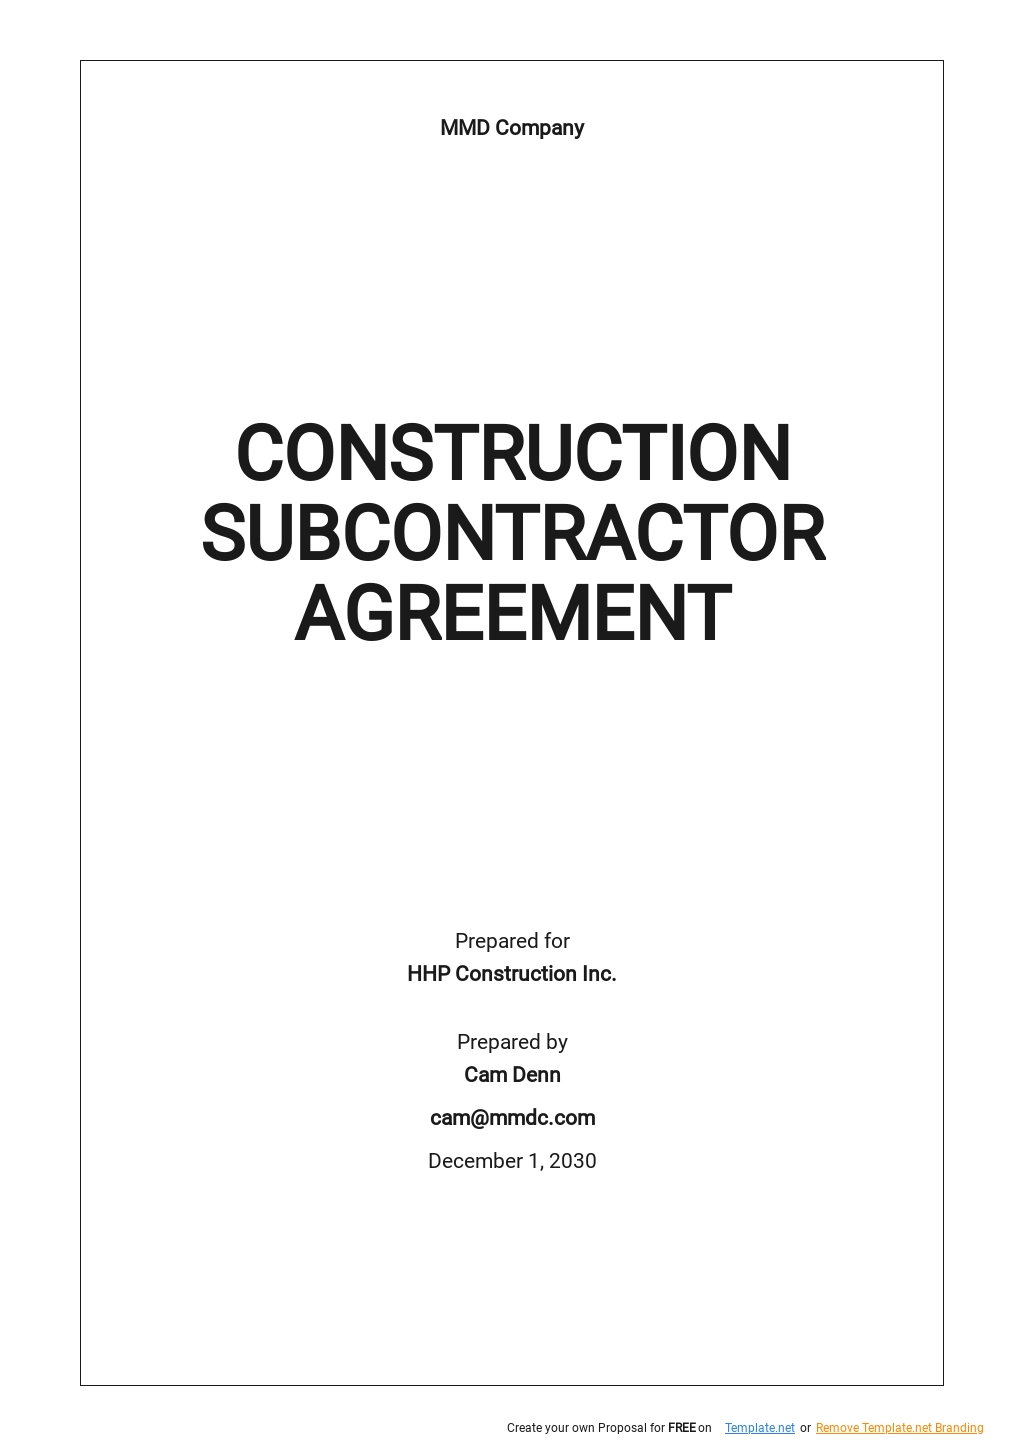 Construction Subcontractor Agreement Template.jpe